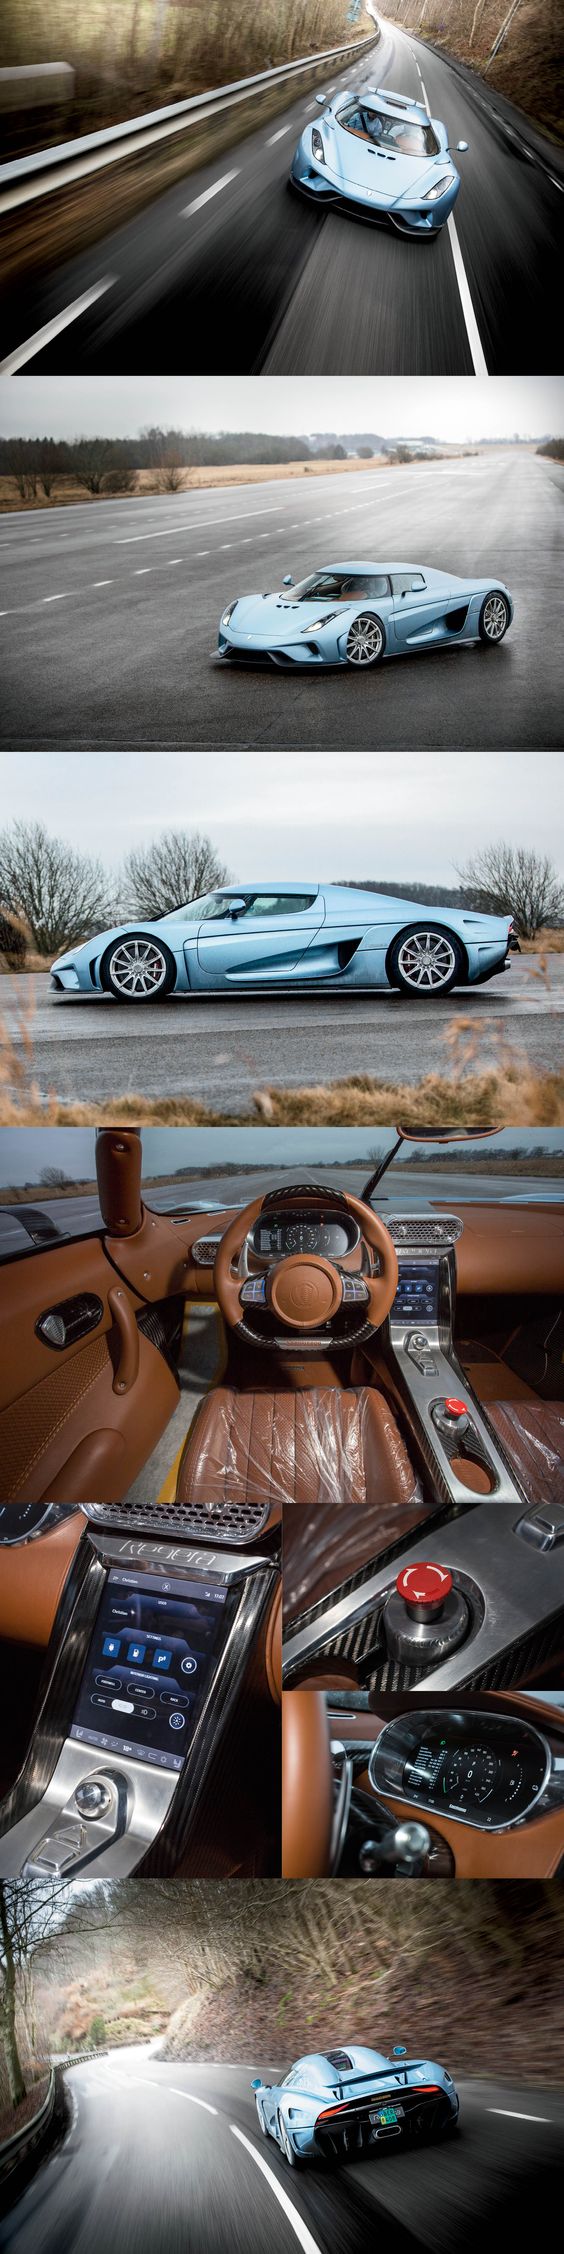 MUST SEE What A Pretty Site To See ''2017 Koenigsegg Regera Prototype'' Here are the hottest new cars, trucks, sports cars, muscle cars, crossovers, SUVs, vans, and everything in between set to go on sale within the next few years. Find out what's coming soon with news and pictures of the future cars and concepts. Concept Cars That Will Make You Rethink The Future. The most futuristic concept cars in the world. The  Best New Concept Cars For The Future. Checkout the photos and read about some best new future cars, concept cars, modern concept. Meet the future of technology & luxury. Look to the future! View the latest concept cars, spy photos and new car release dates famed Future Vehicle Forecast. Get the most recent news & updates on the newest unreleased & rumored cars to be announced by automakers. Future Car reviews and ratings, video reviews, user reviews, Future Car buying guides, prices, and comparisons from Newcarreleasedates.com. Here we have our guide to the most compelling vehicles due to arrive over the next few years. Full details at newcarreleasedates.com 